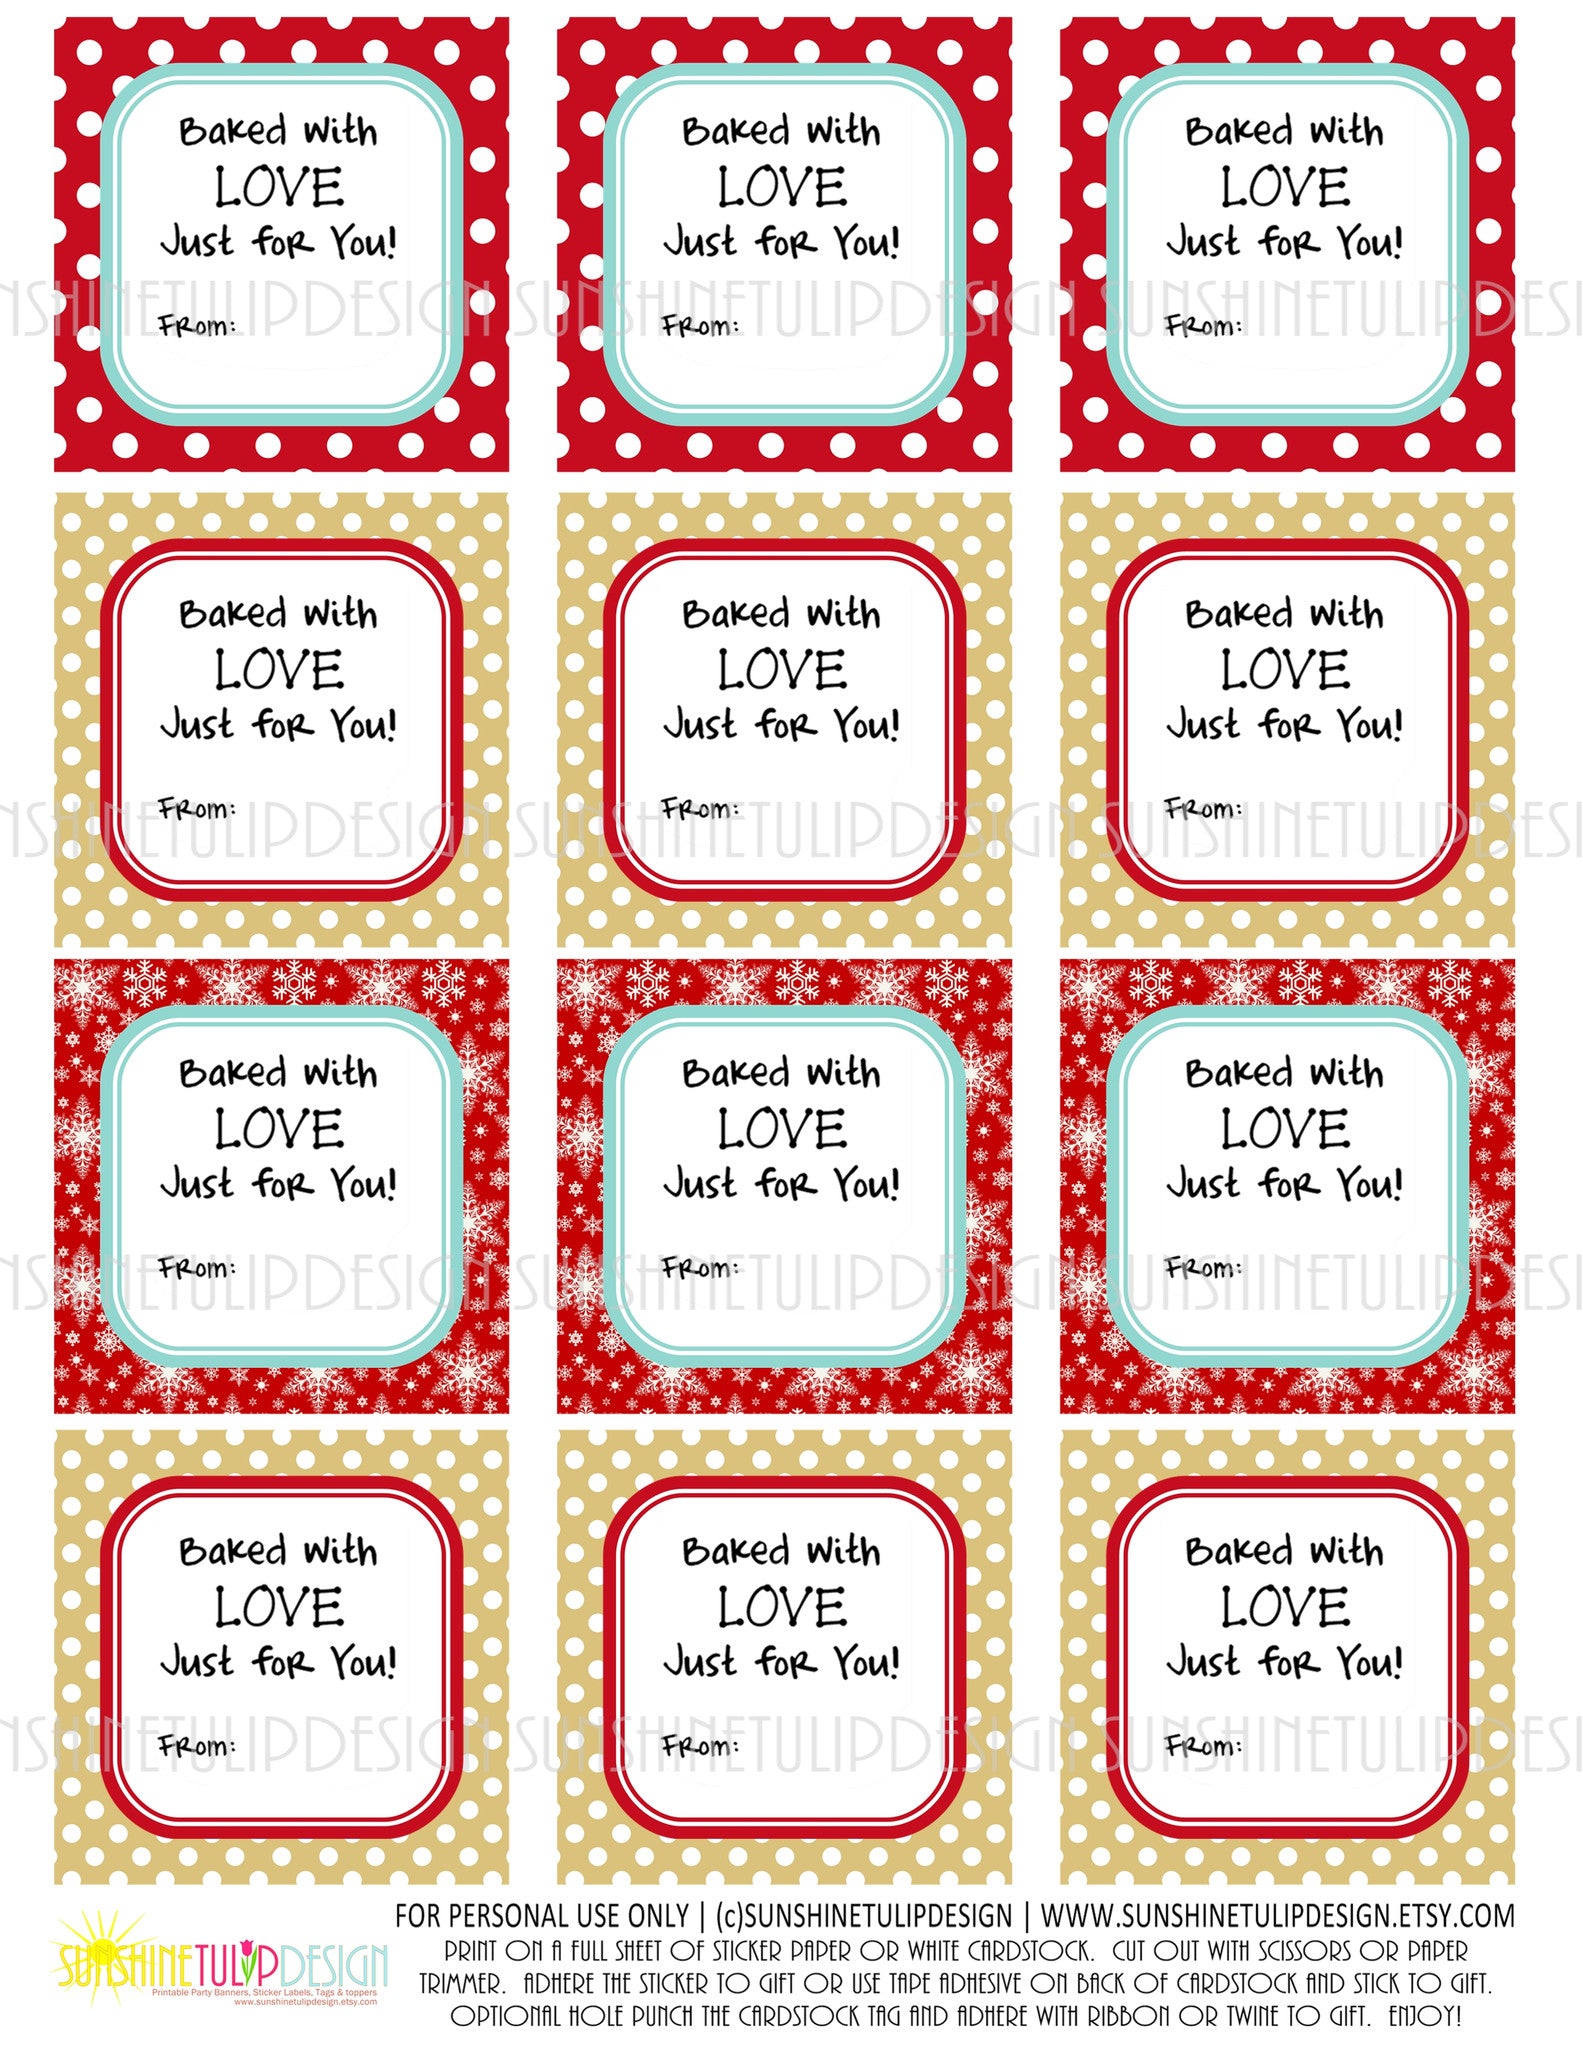 baked-with-love-printable-tags-a-gift-to-you-the-cottage-market